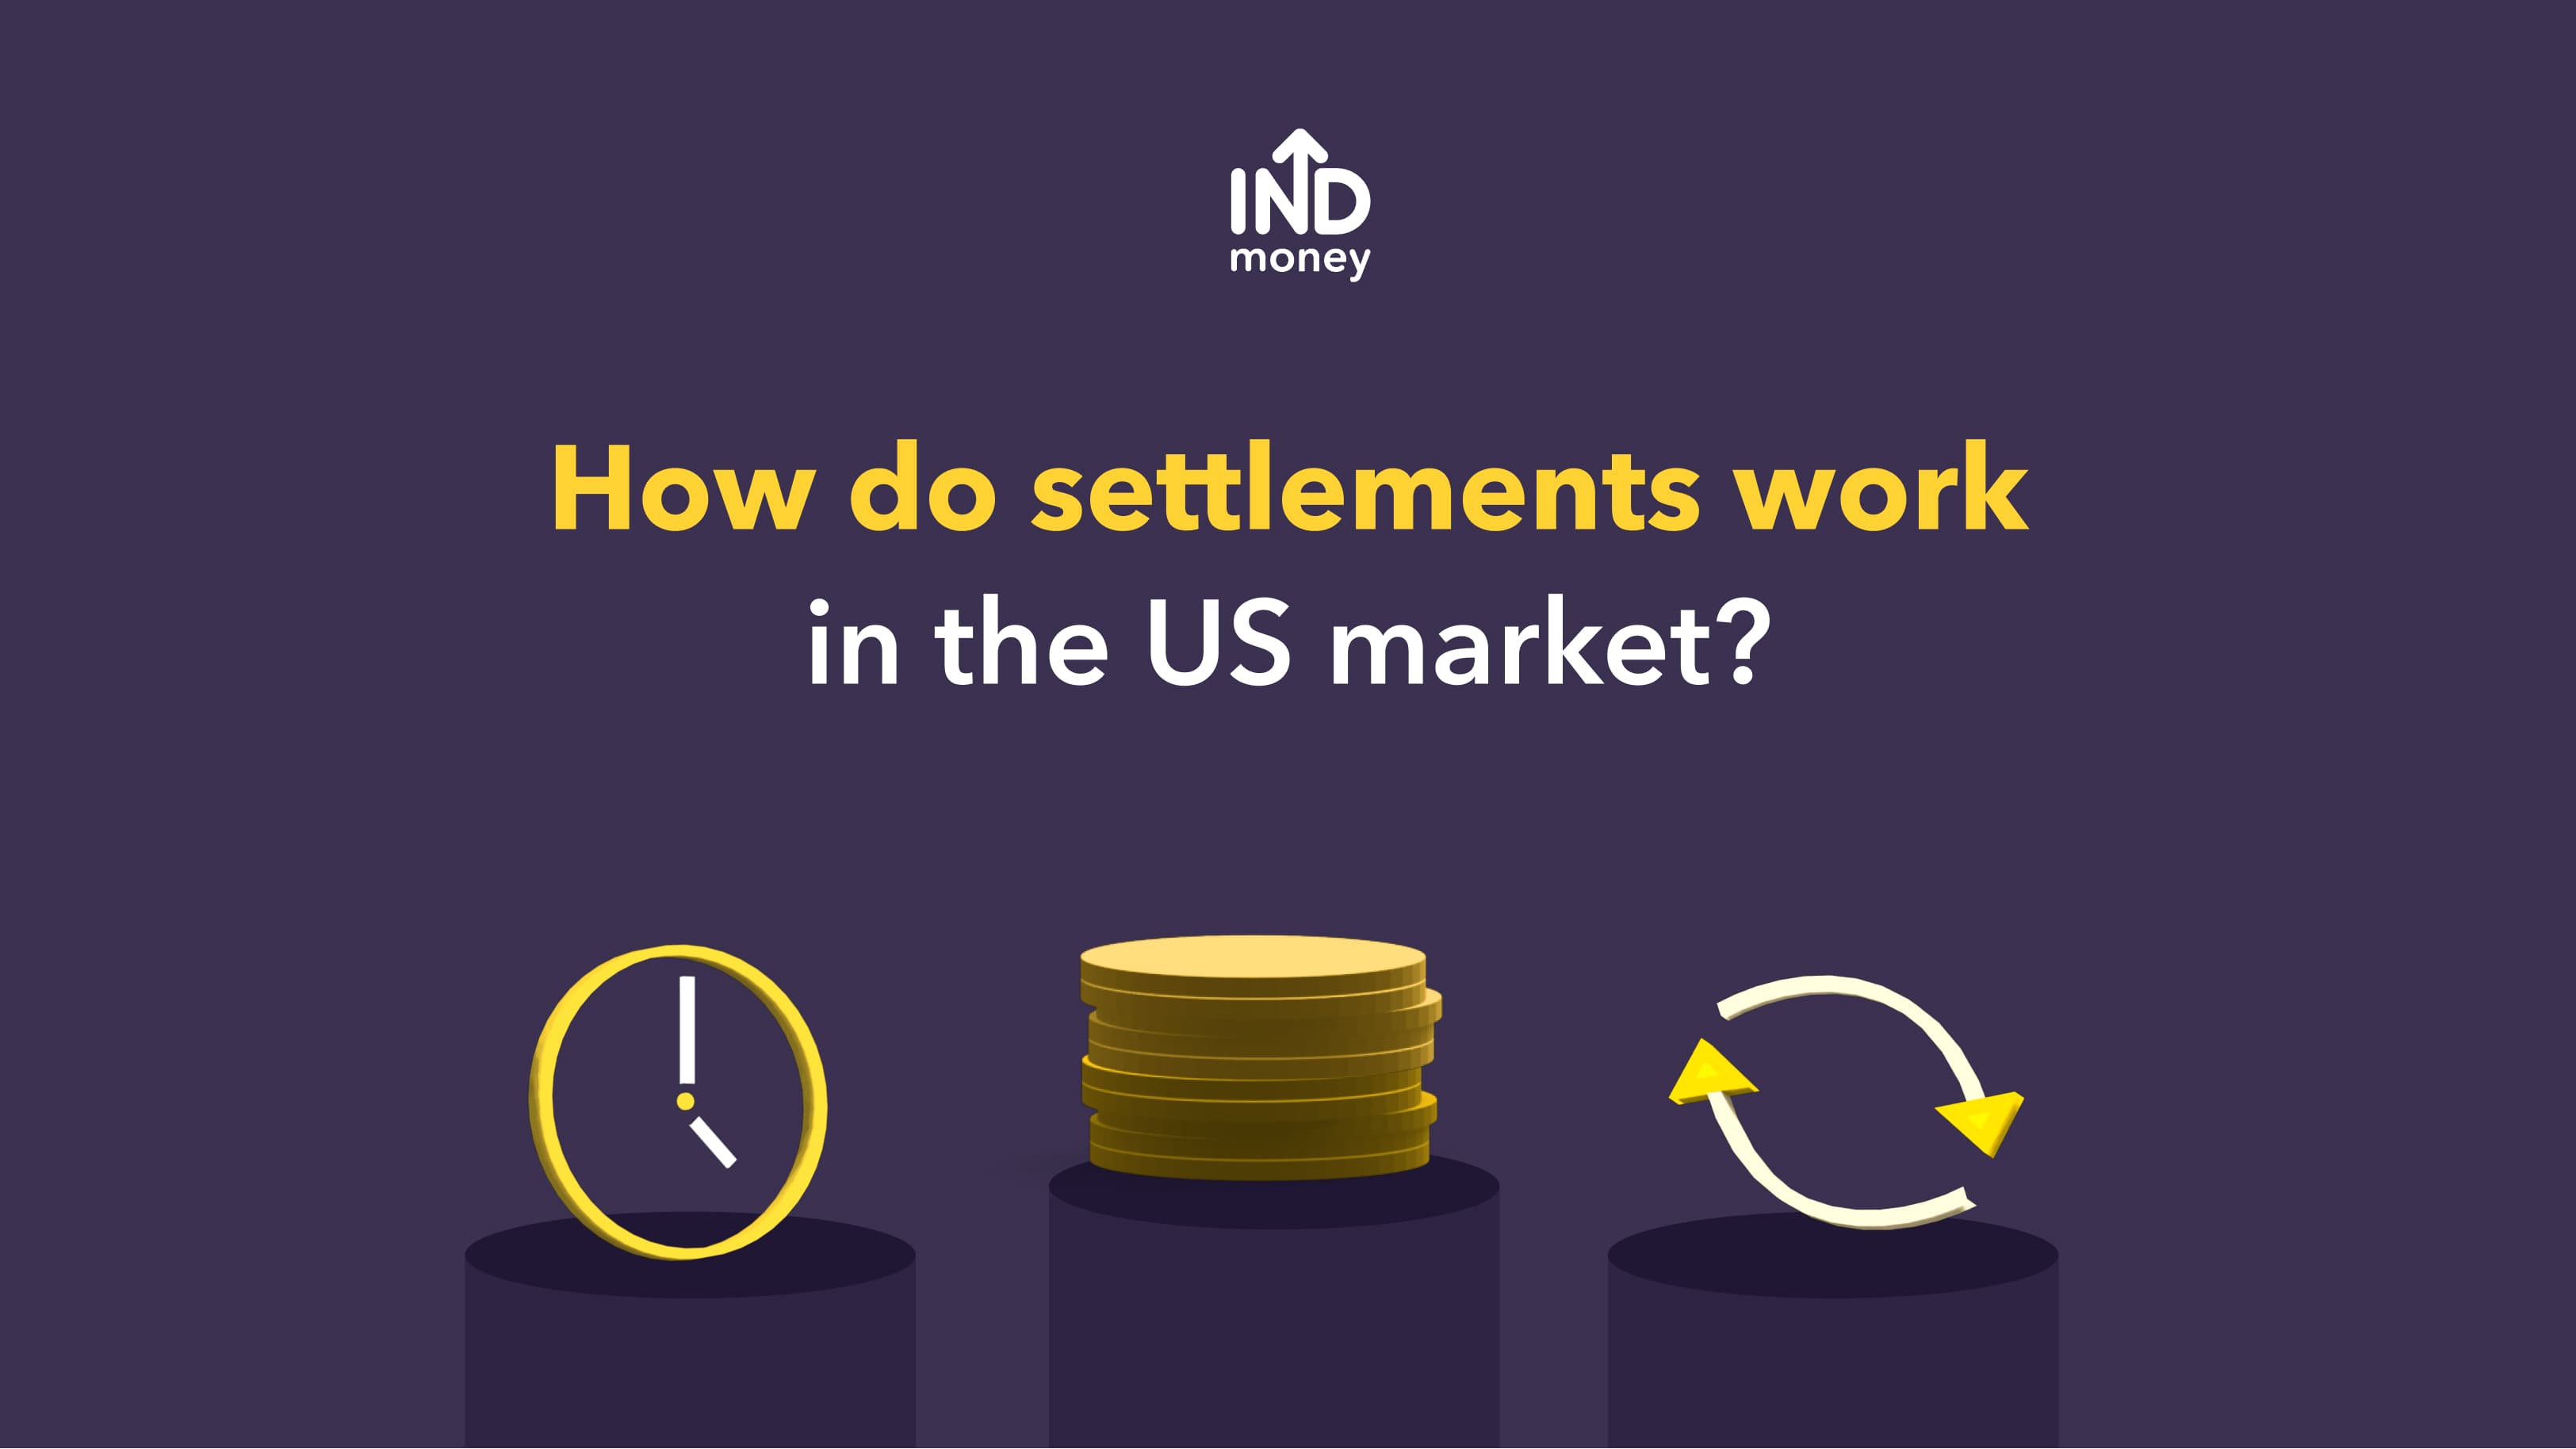 How do settlements work in the US market?